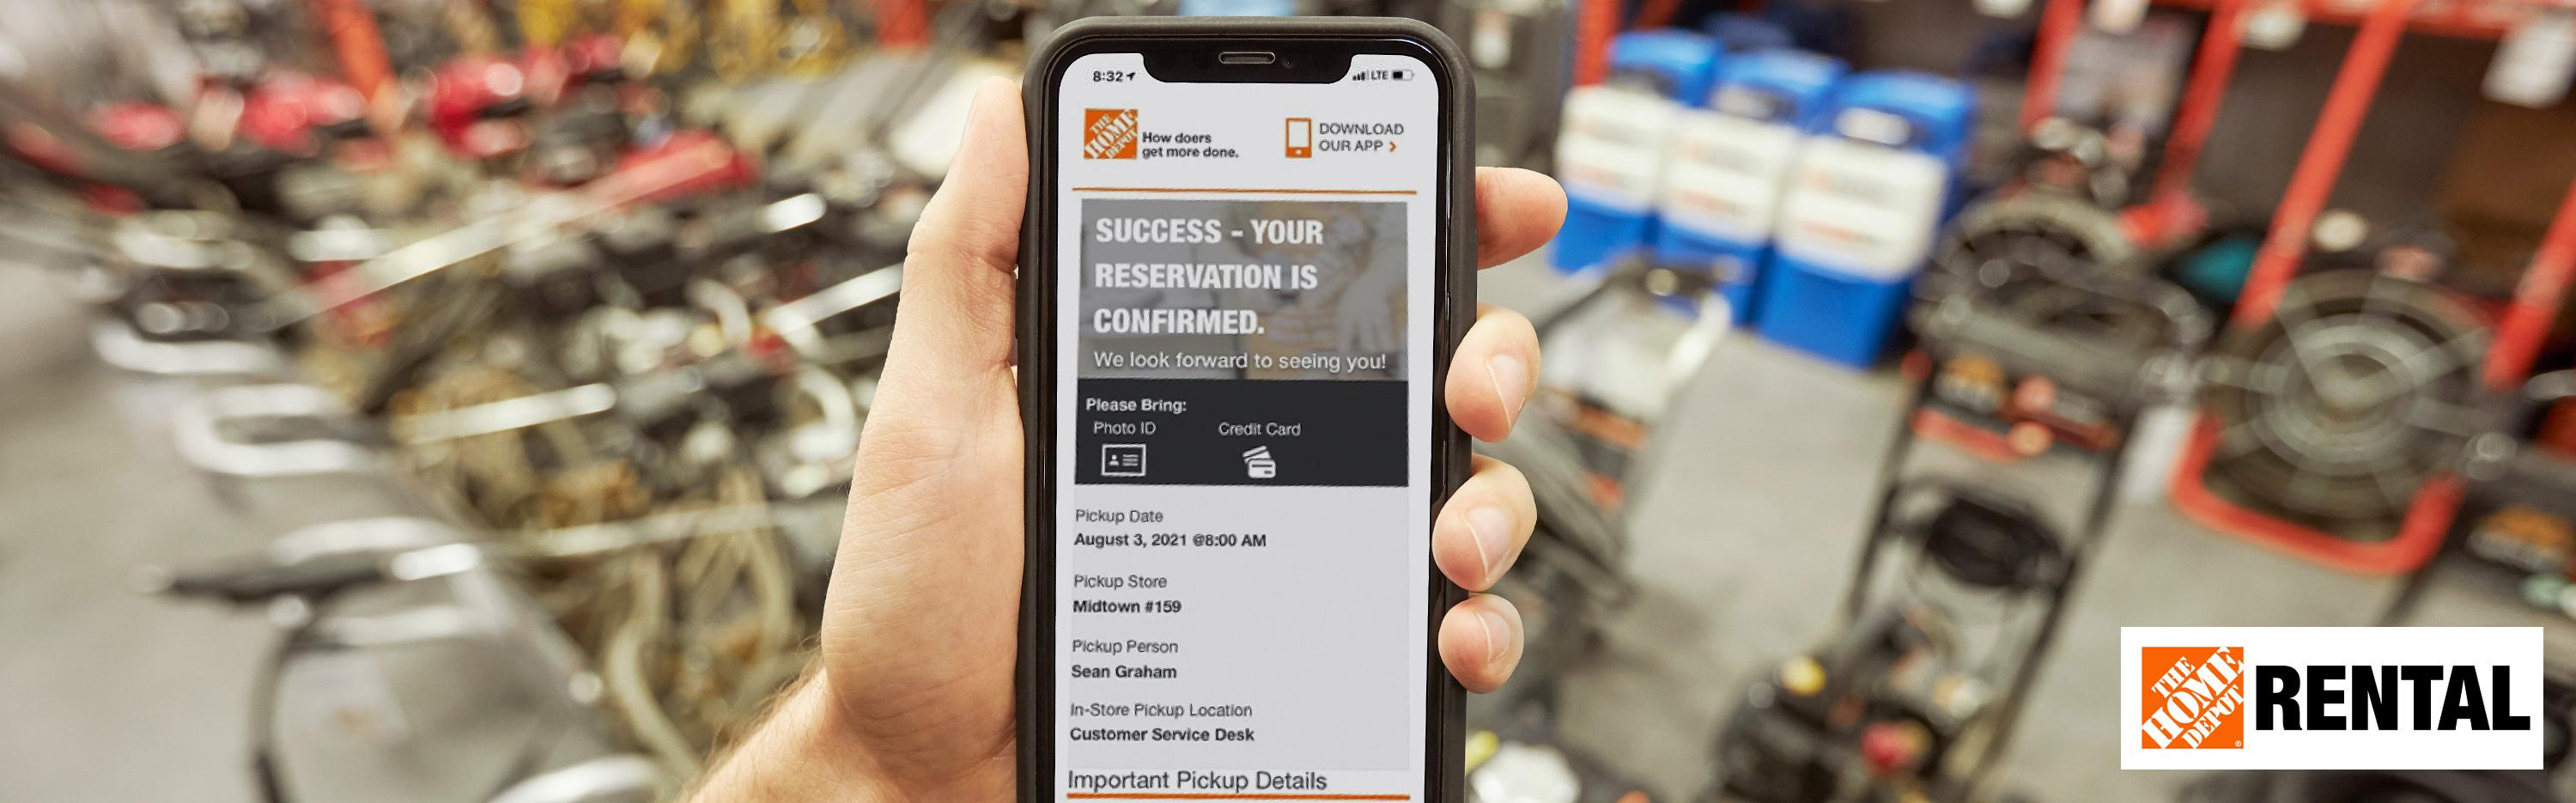 The Home Depot Launches Online Rental Reservations; Opens New Rental  Locations | The Home Depot